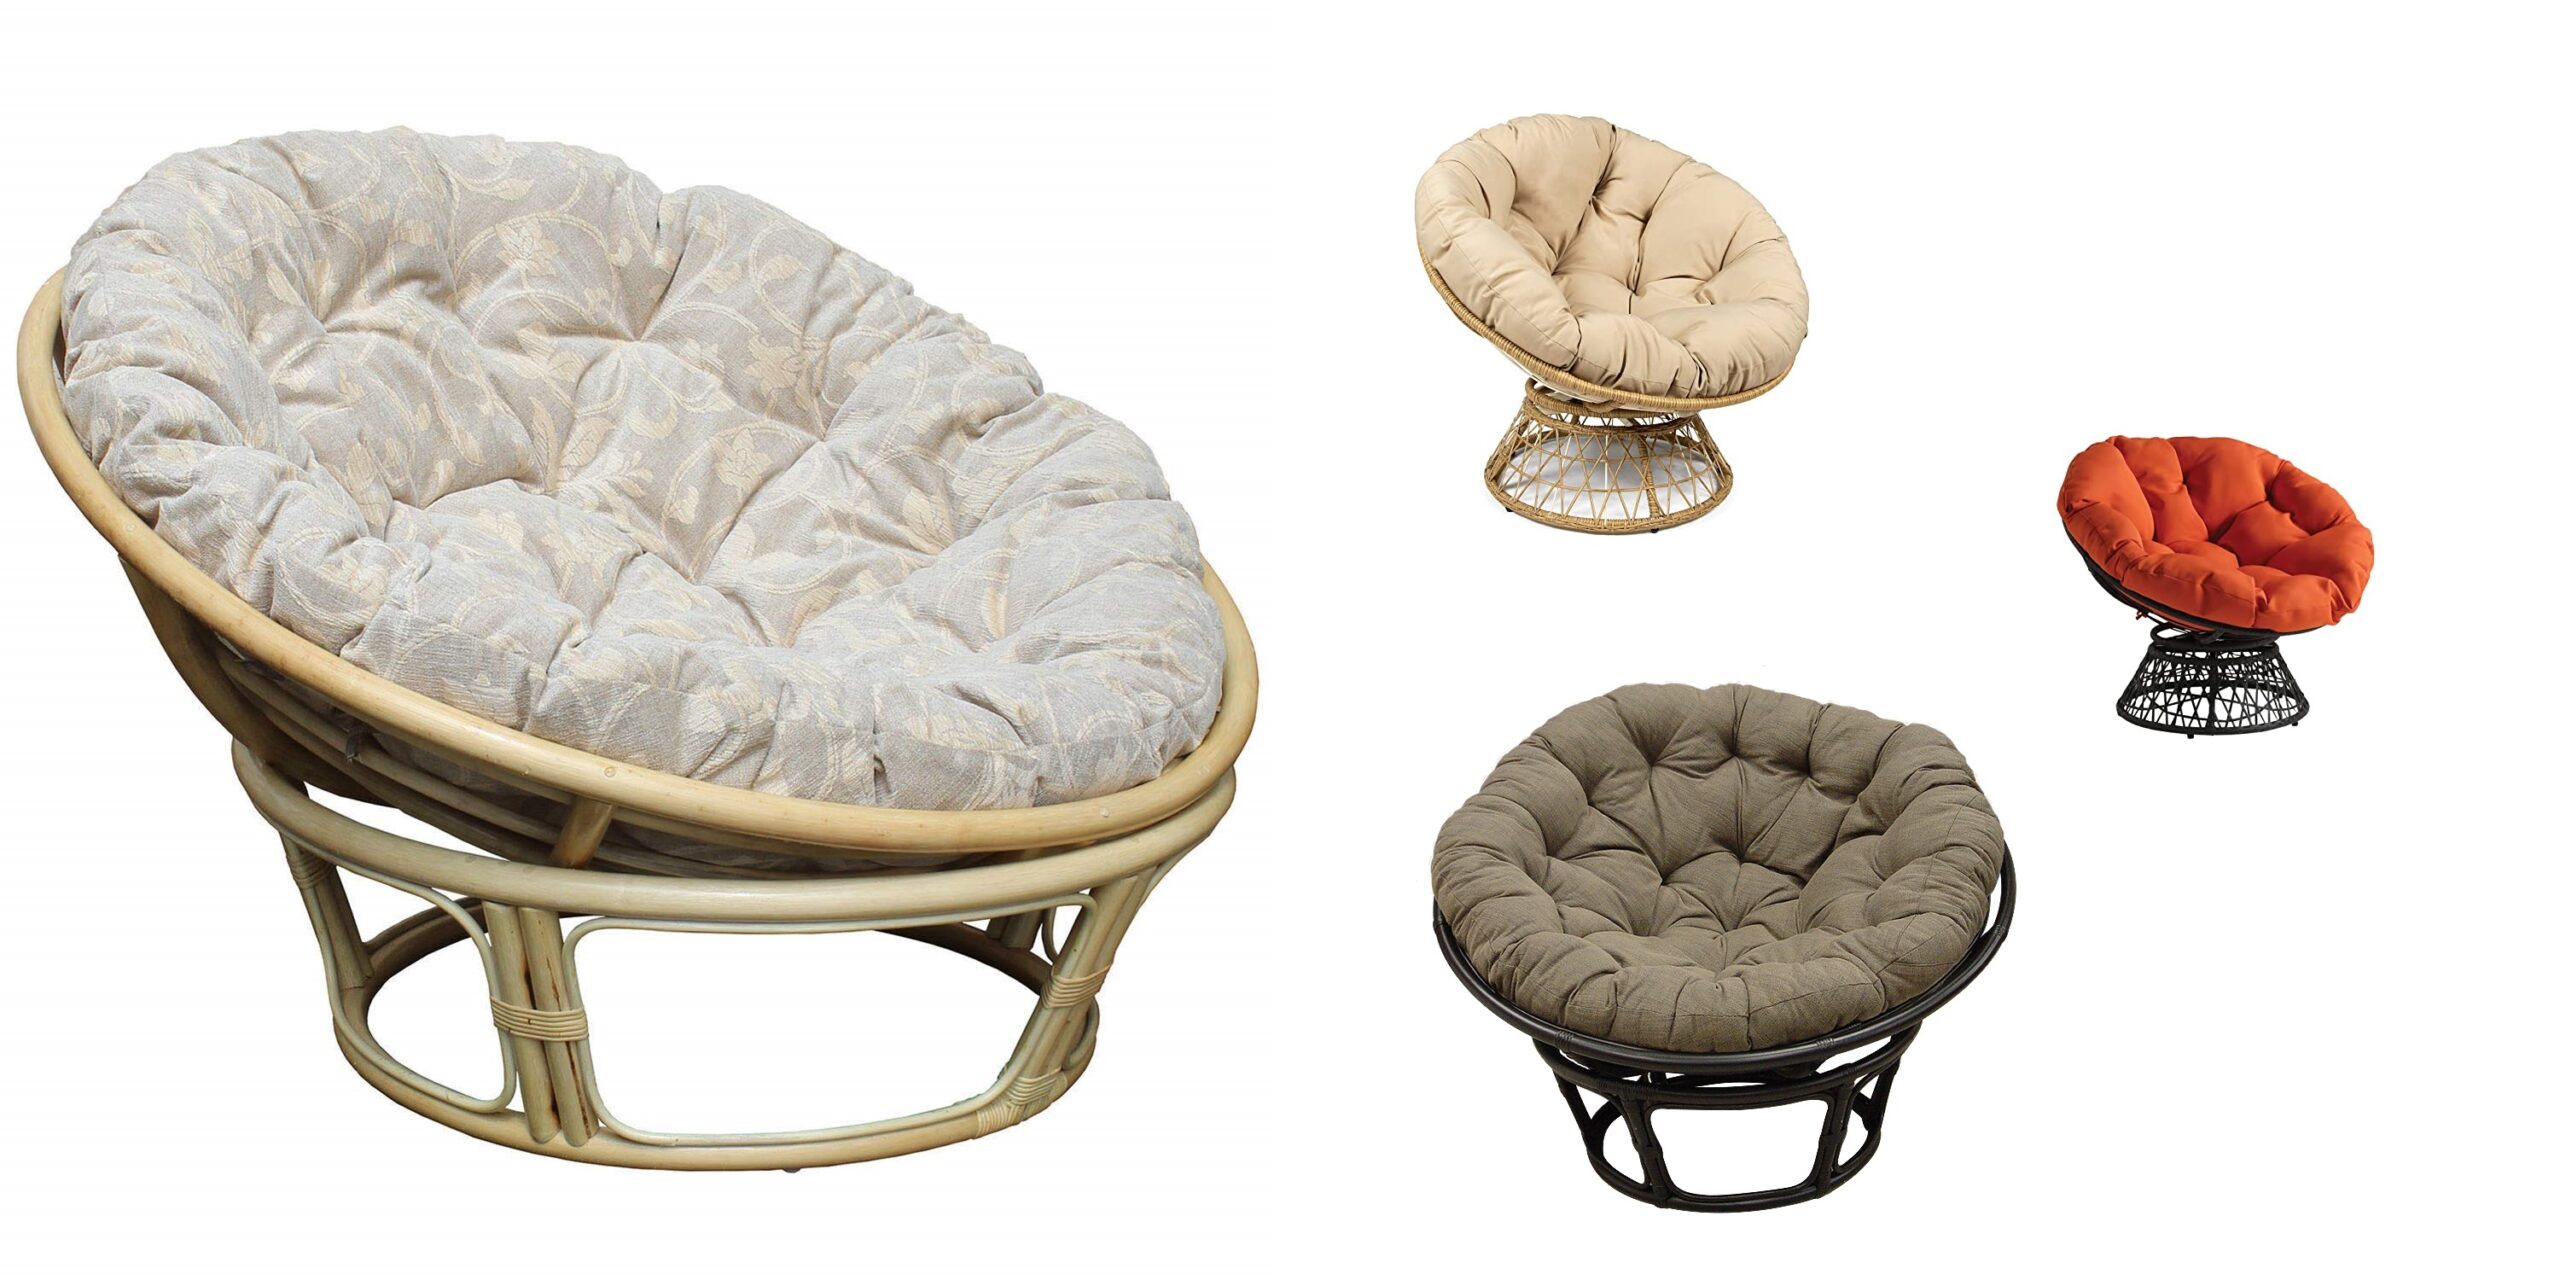 Comfort Yourself With A Papasan Chair